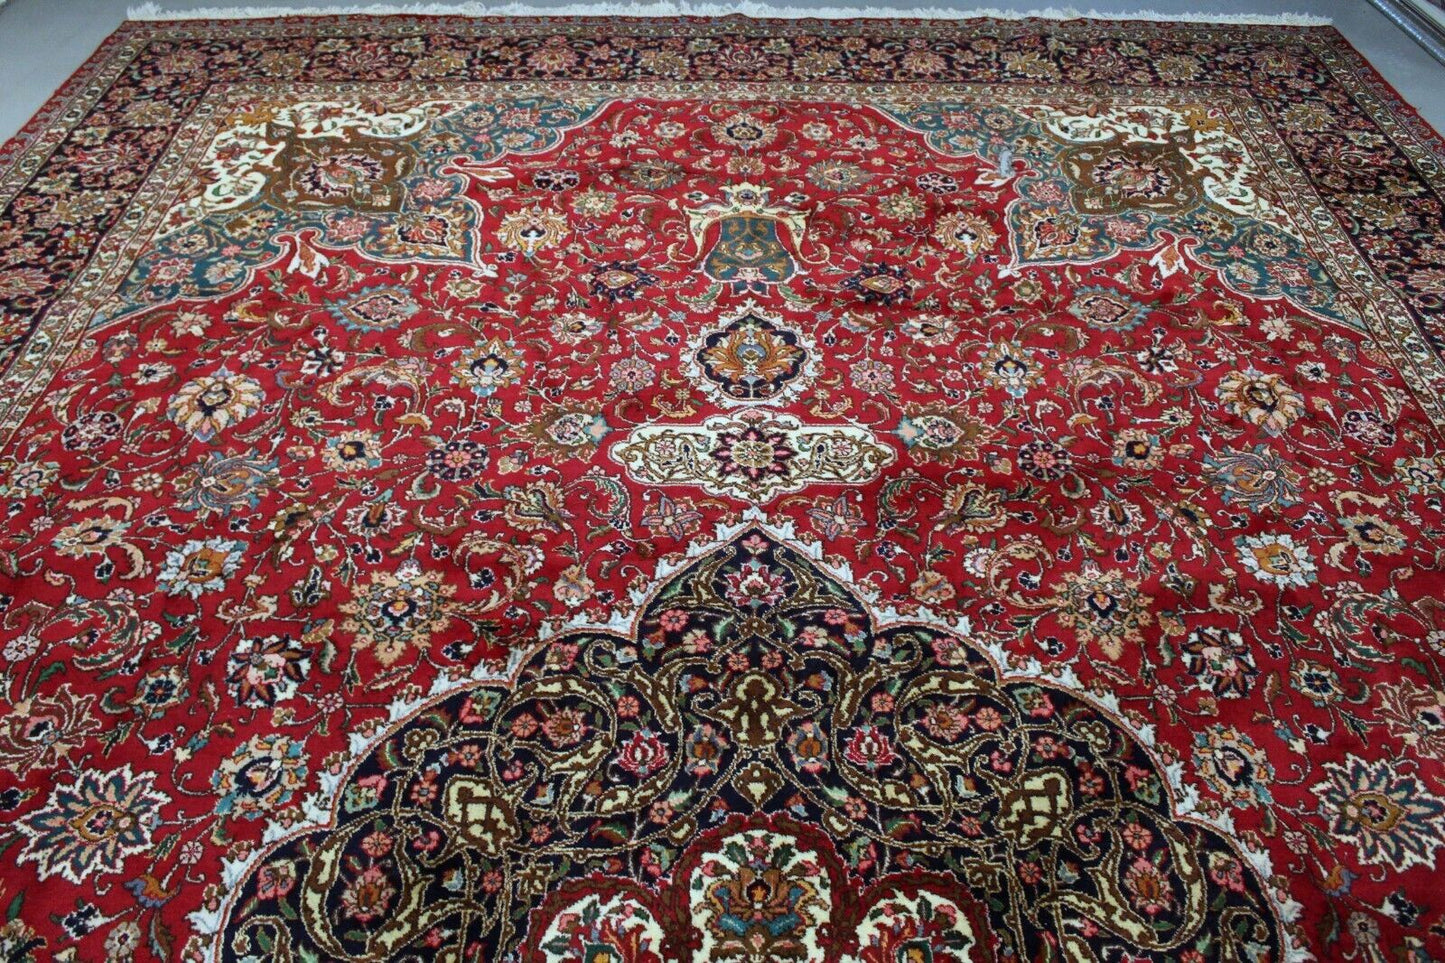 High-Quality Wool Base Providing Durability and Comfort on Vintage Persian Tabriz Oversize Rug - 1960s